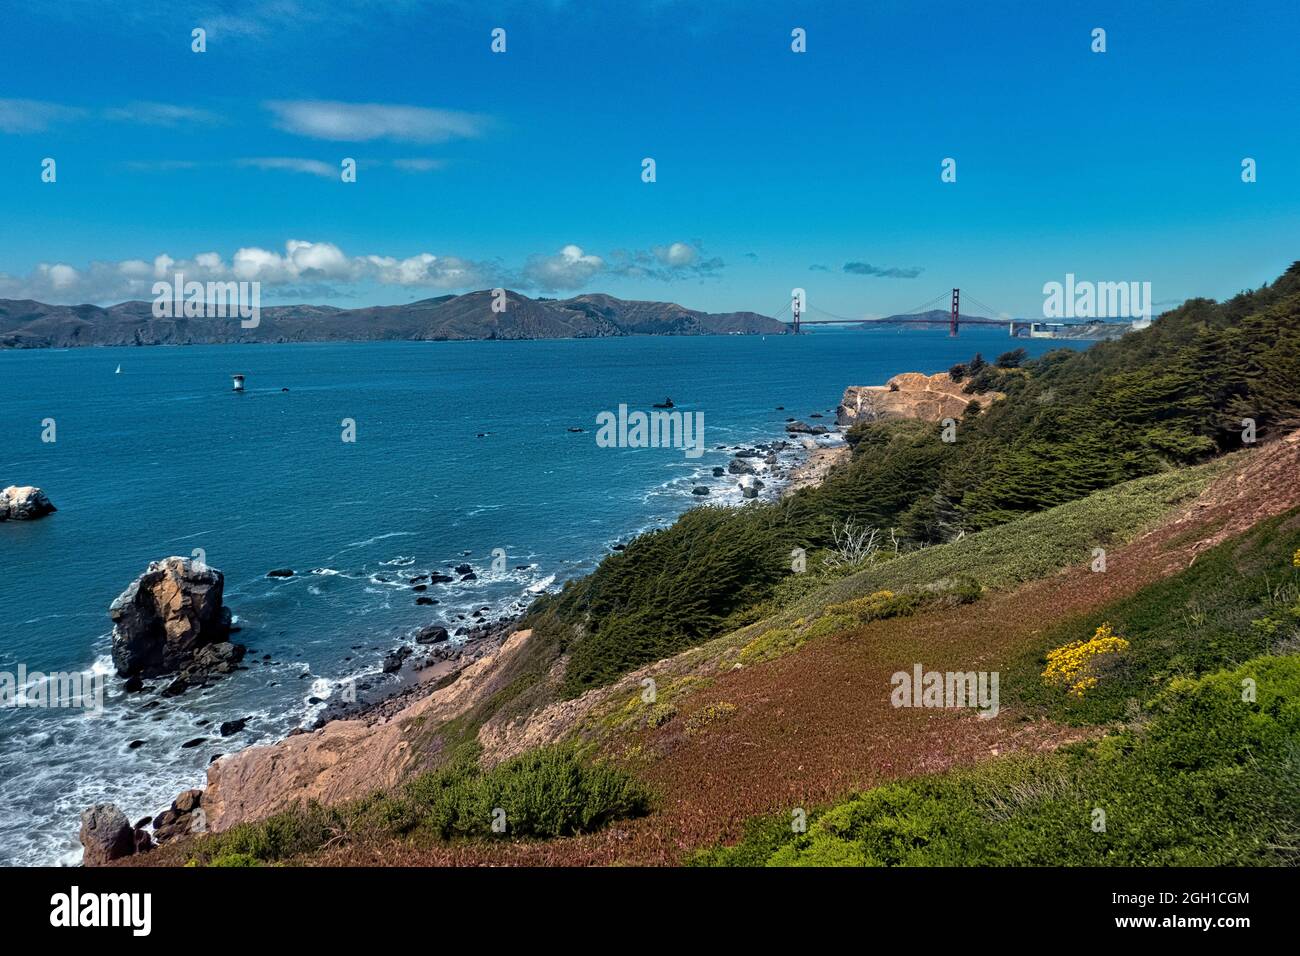 View of the Golden Gate Bridge from Lands End, San Francisco, California, U. S. A. Stock Photo